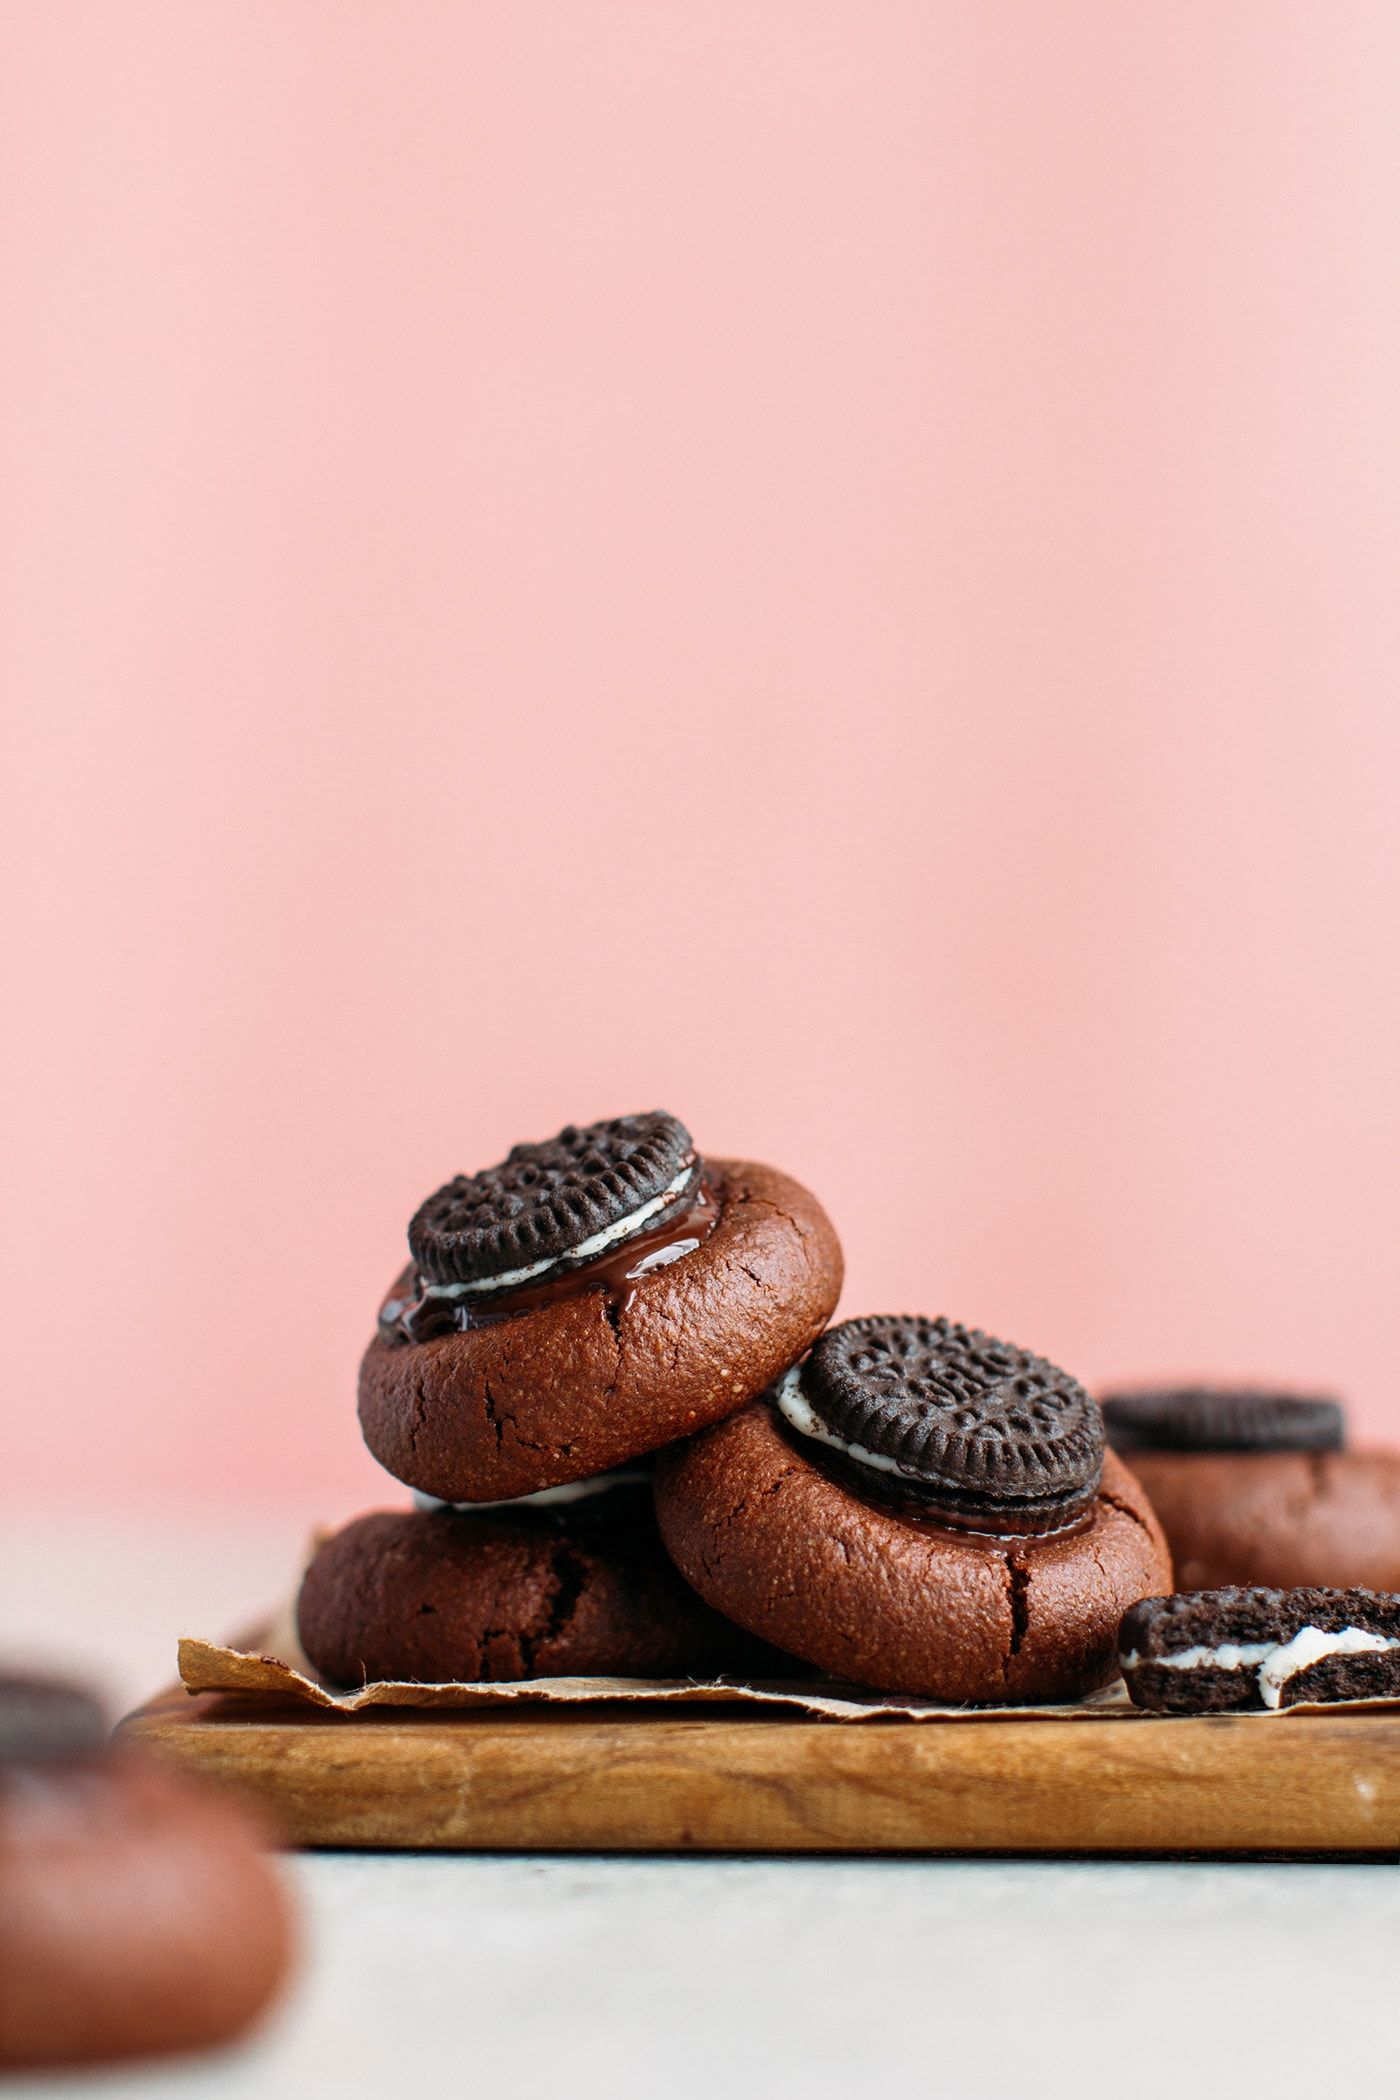 A stack of chocolate cookies with an Oreo stuffed in the middle - Oreo